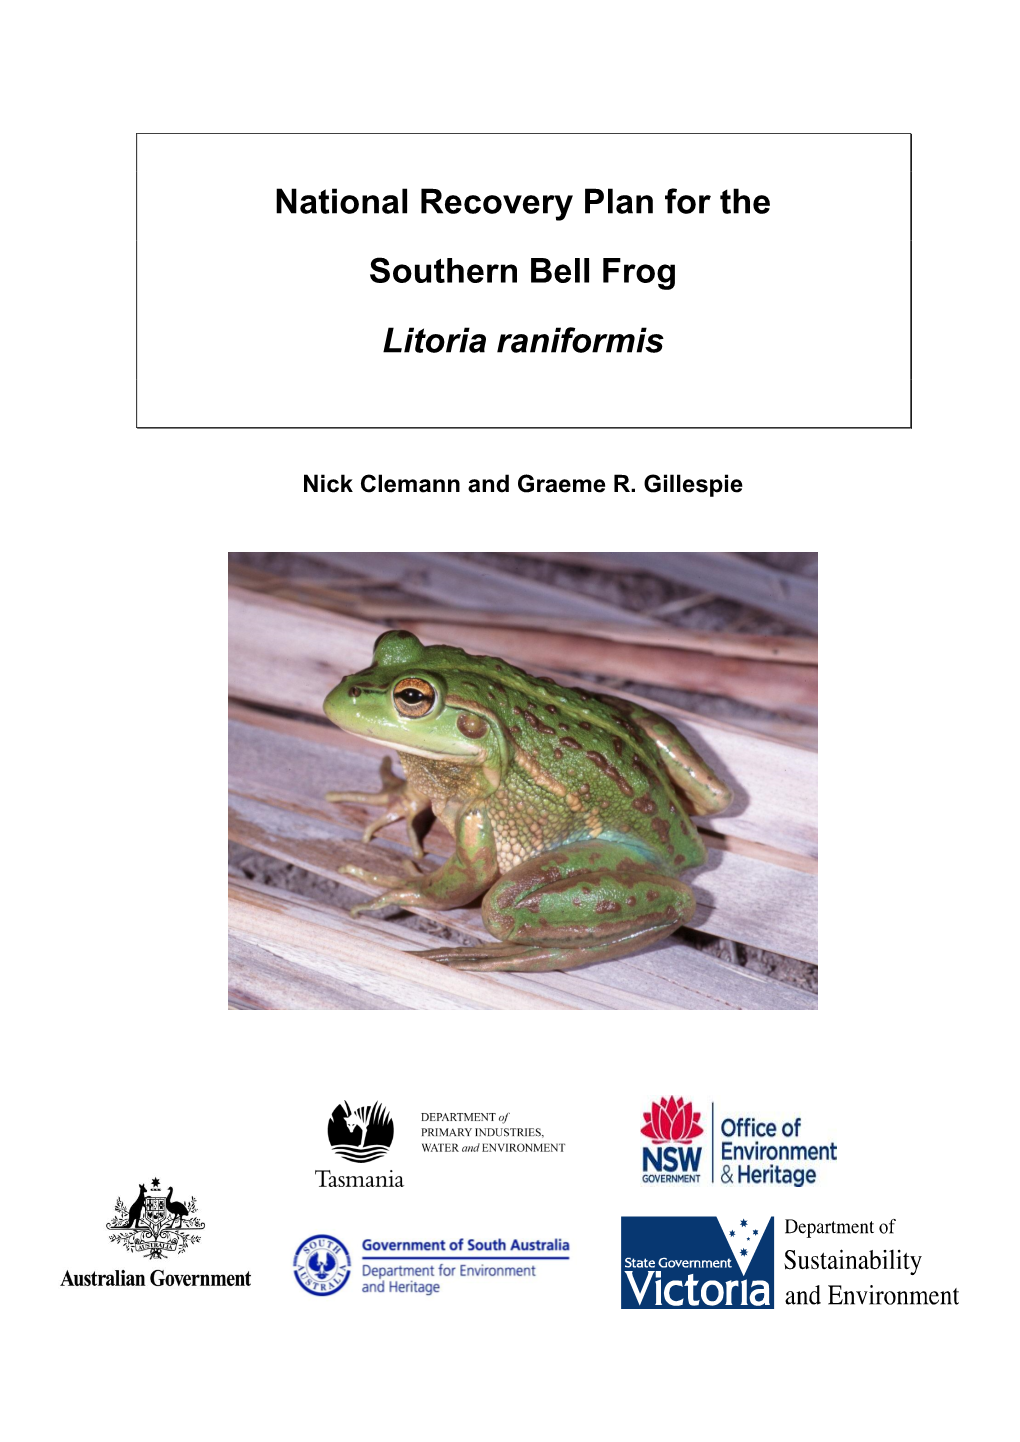 National Recovery Plan for the Southern Bell Frog Litoria Raniformis